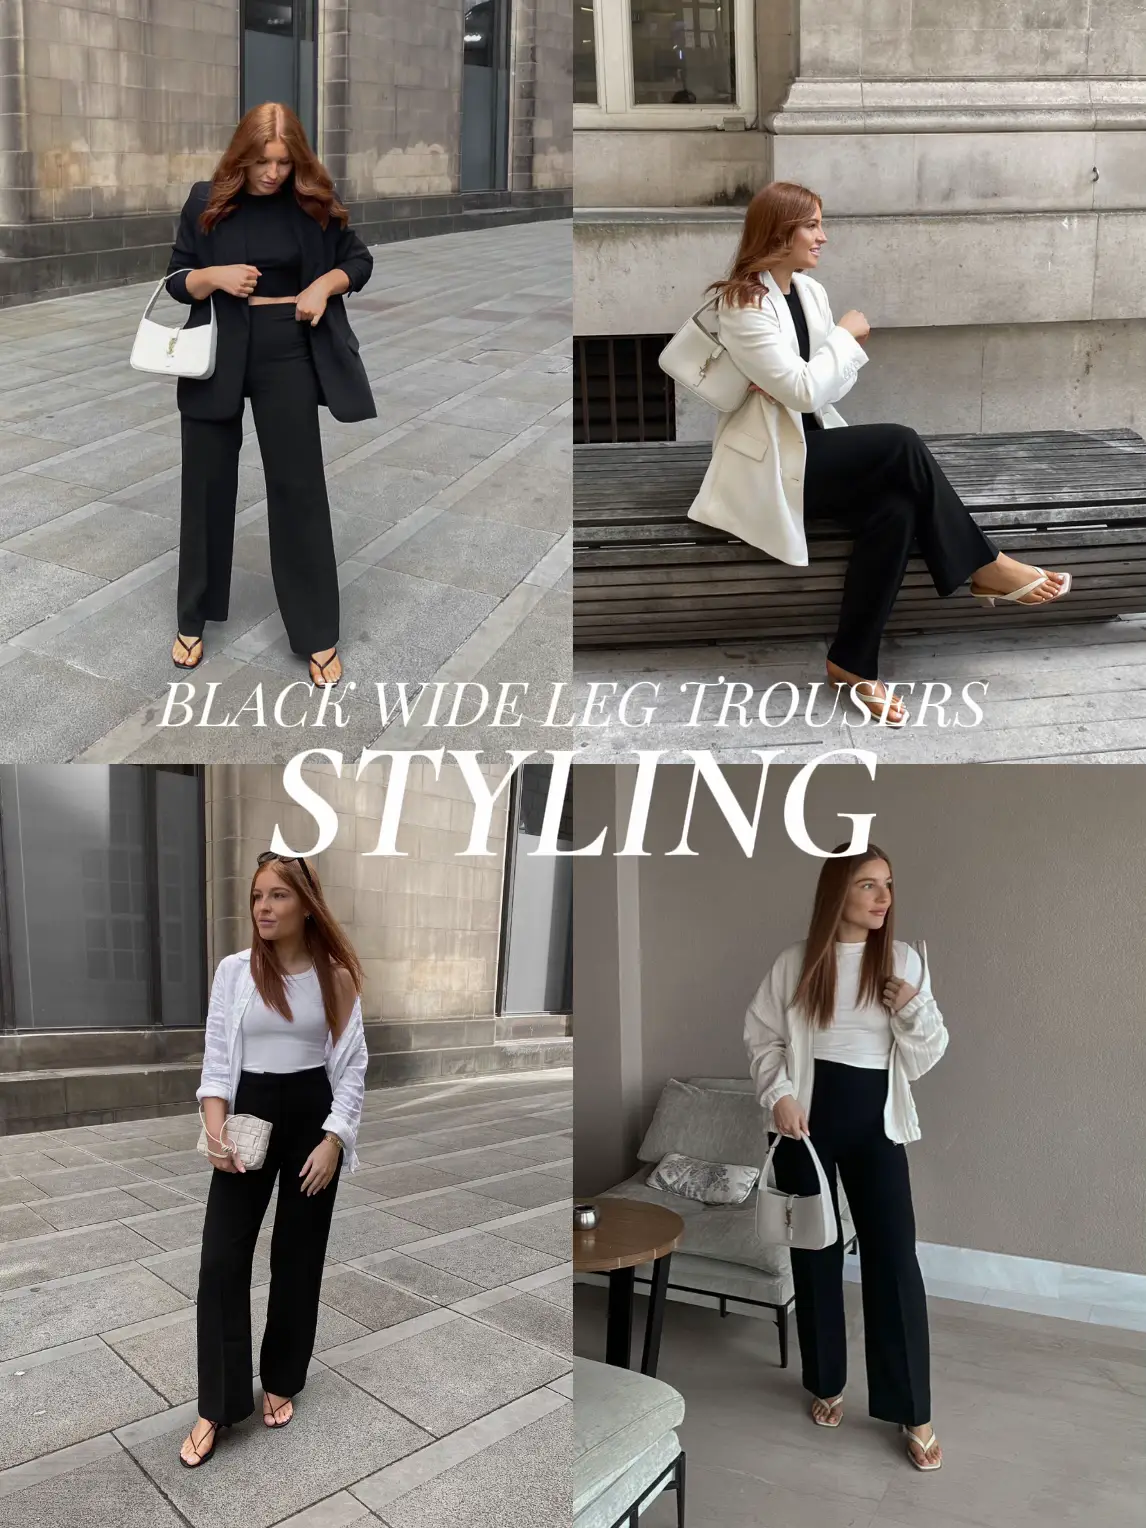 5 Ways To Style Black Wide Leg Trousers 🖤, Gallery posted by Lydia Fleur